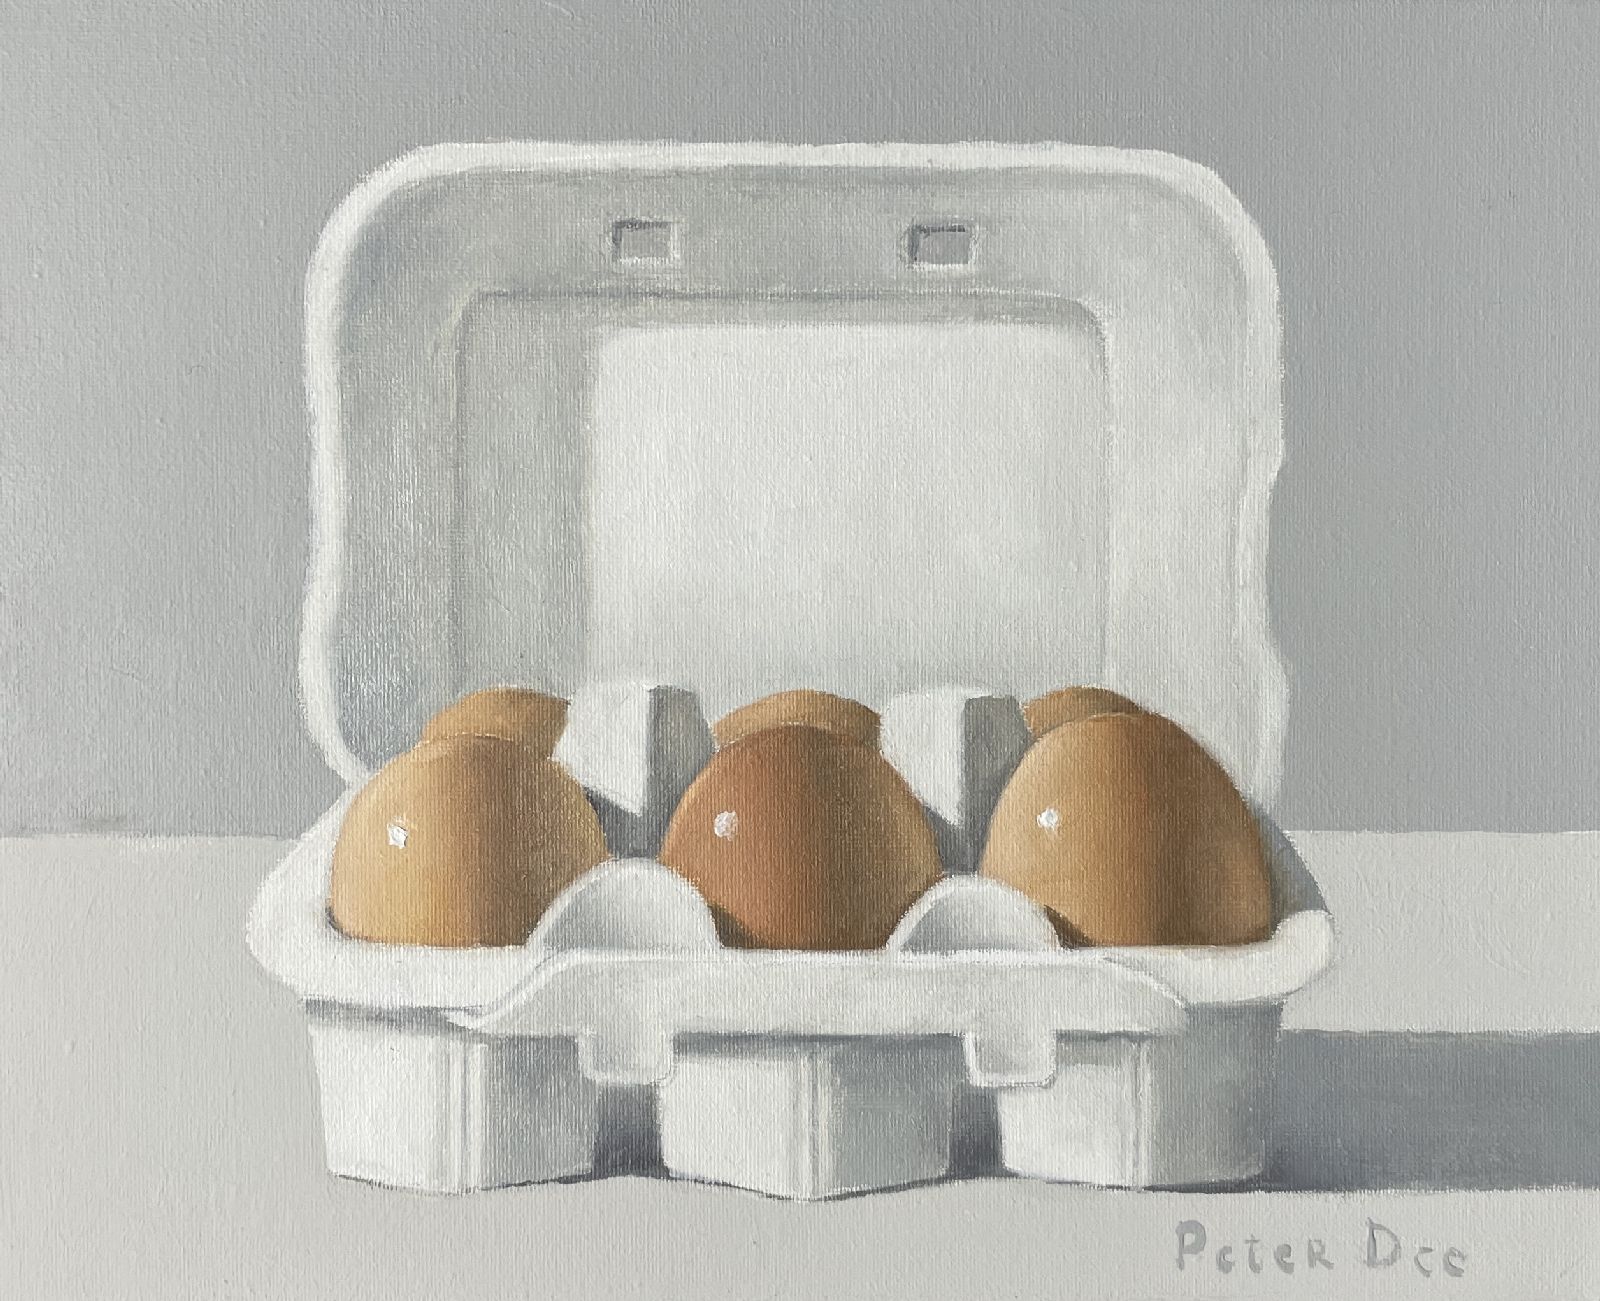 Box of eggs by Peter Dee